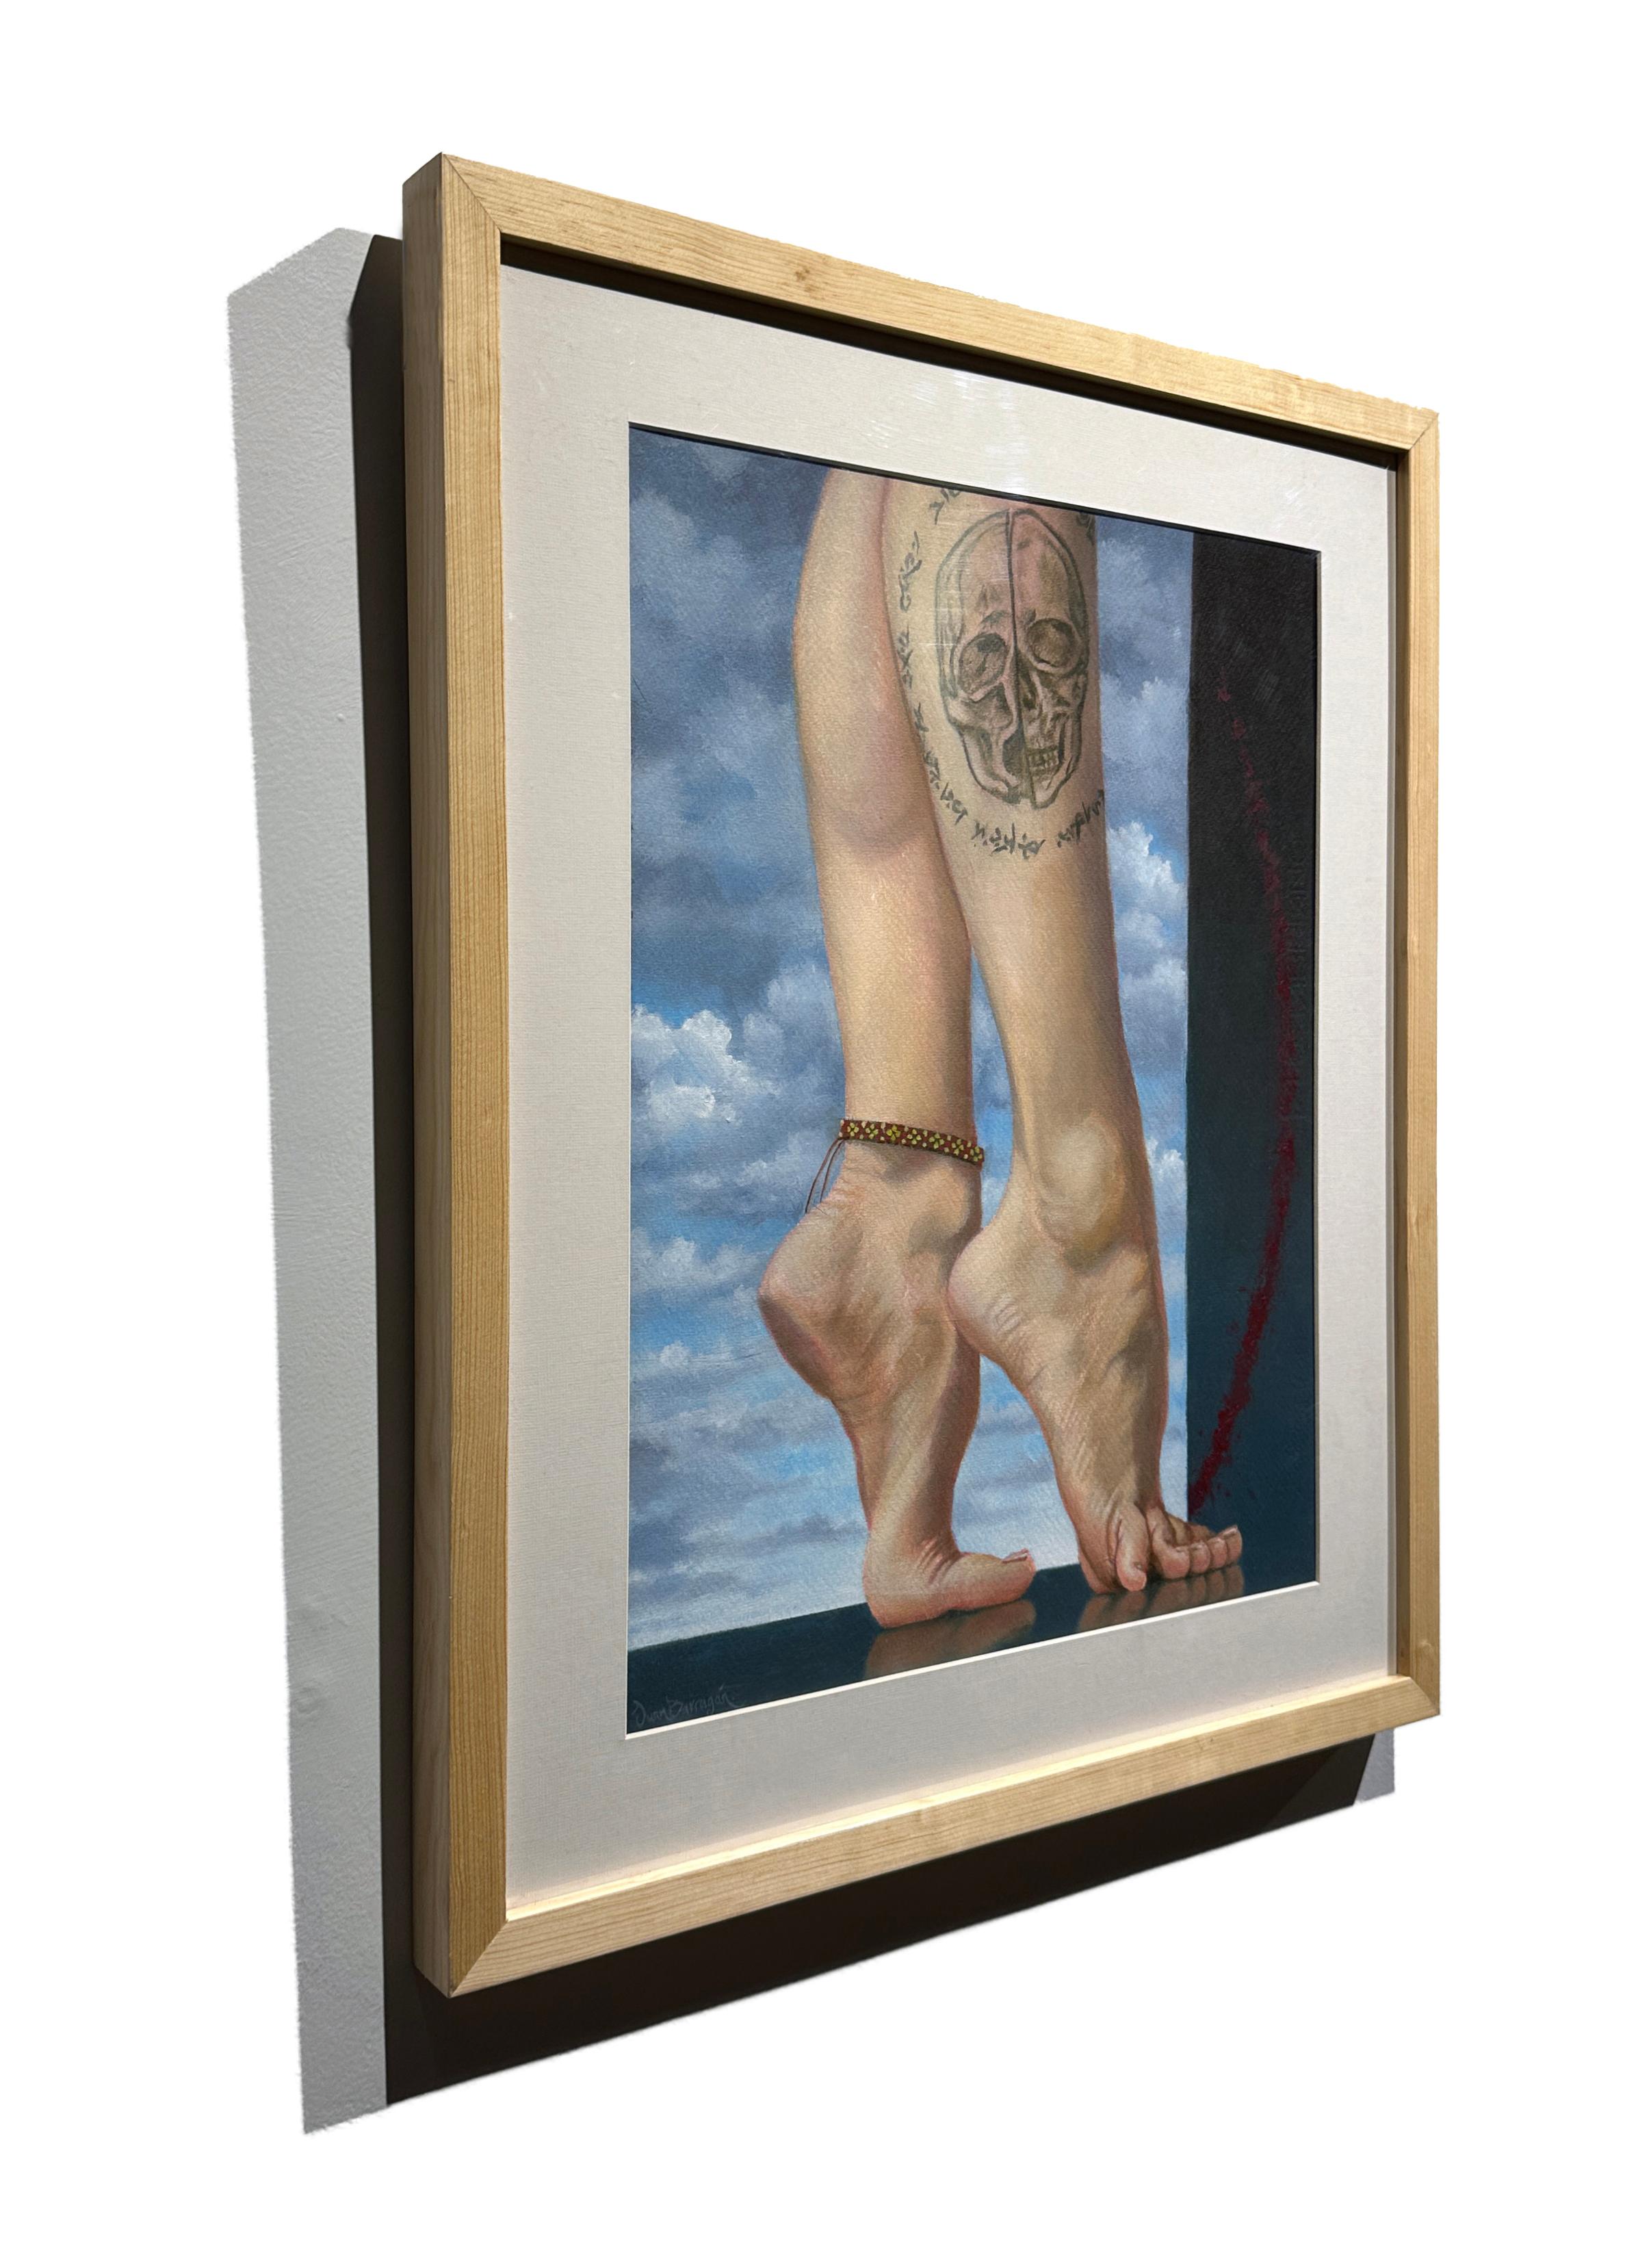 A pair of muscular legs emblazoned with a skull tattoo are set against a bright blue sky in Juan Barragán's painting titled 